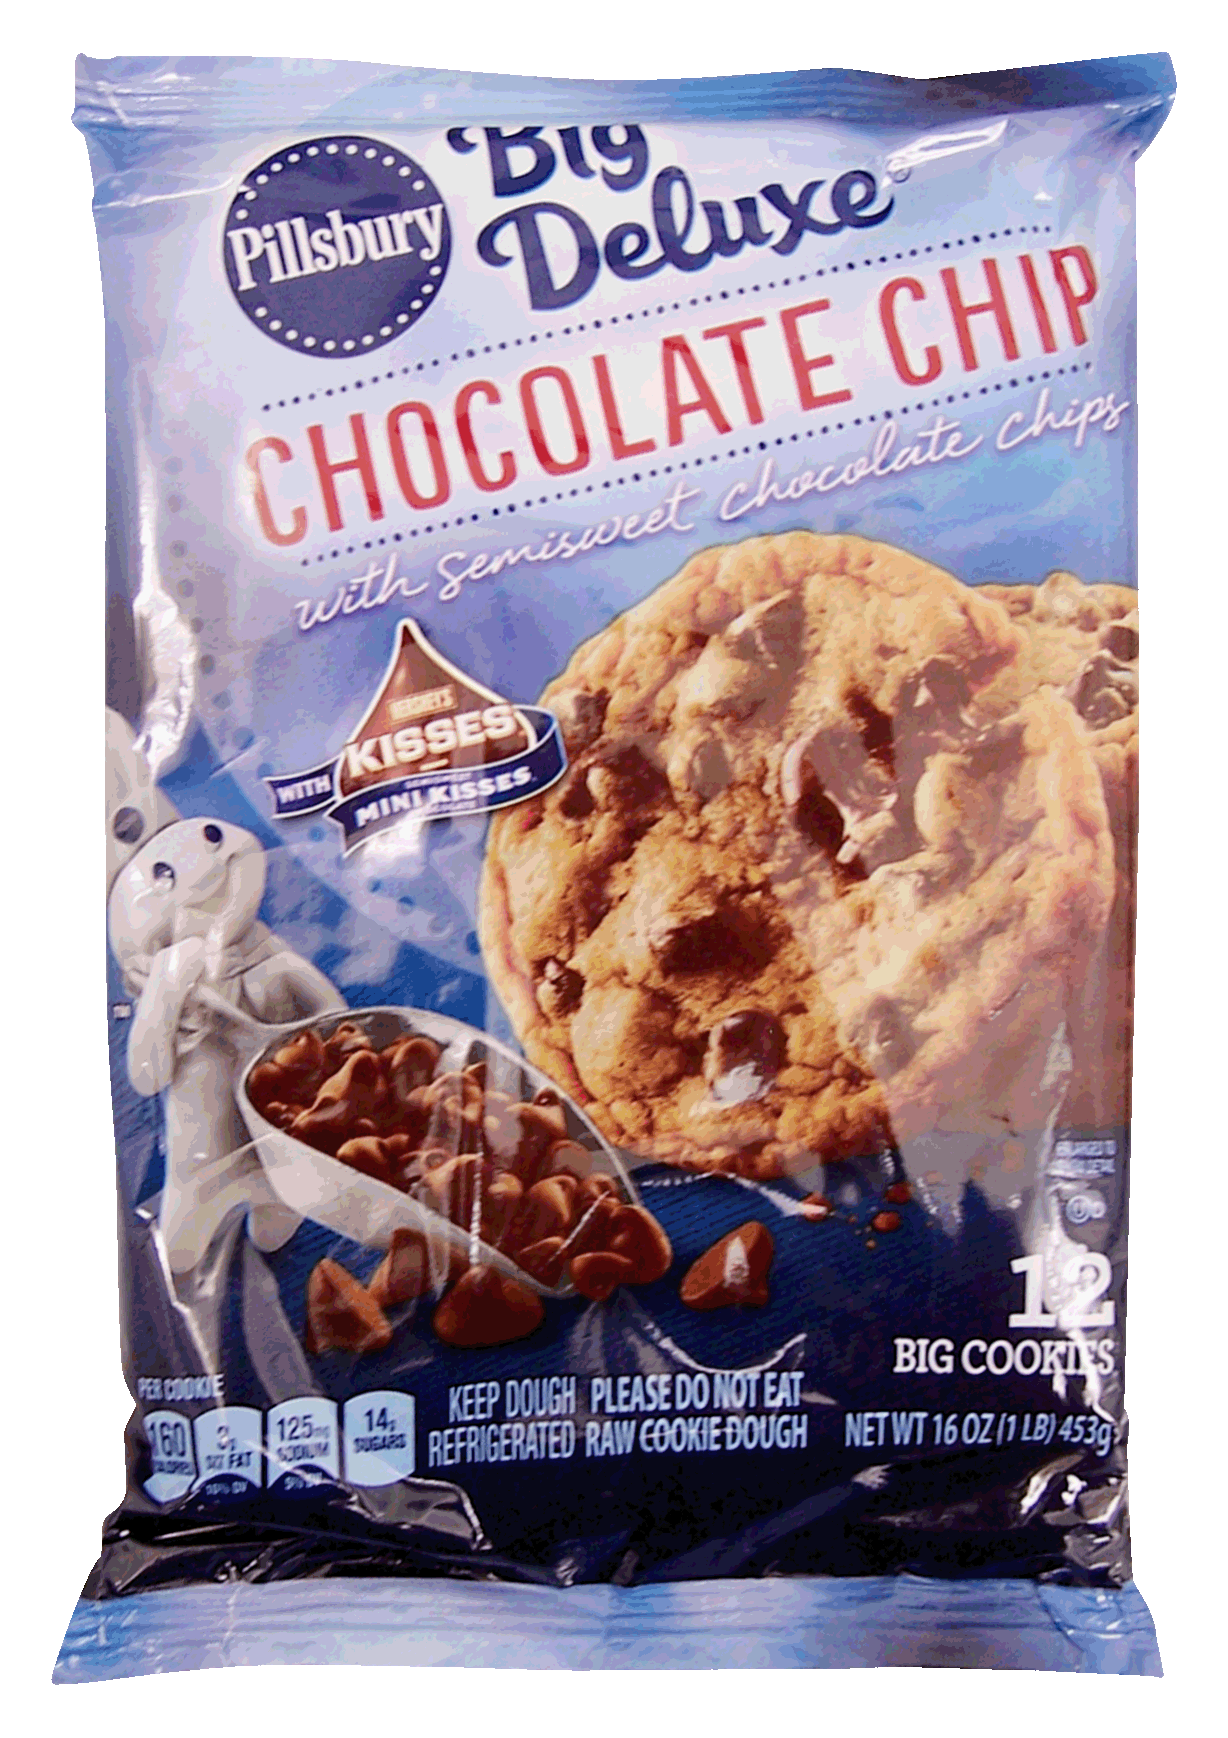 Pillsbury Big Deluxe chocolate chip with Hershey's mini kisses cookie dough, makes 12 big cookies Full-Size Picture